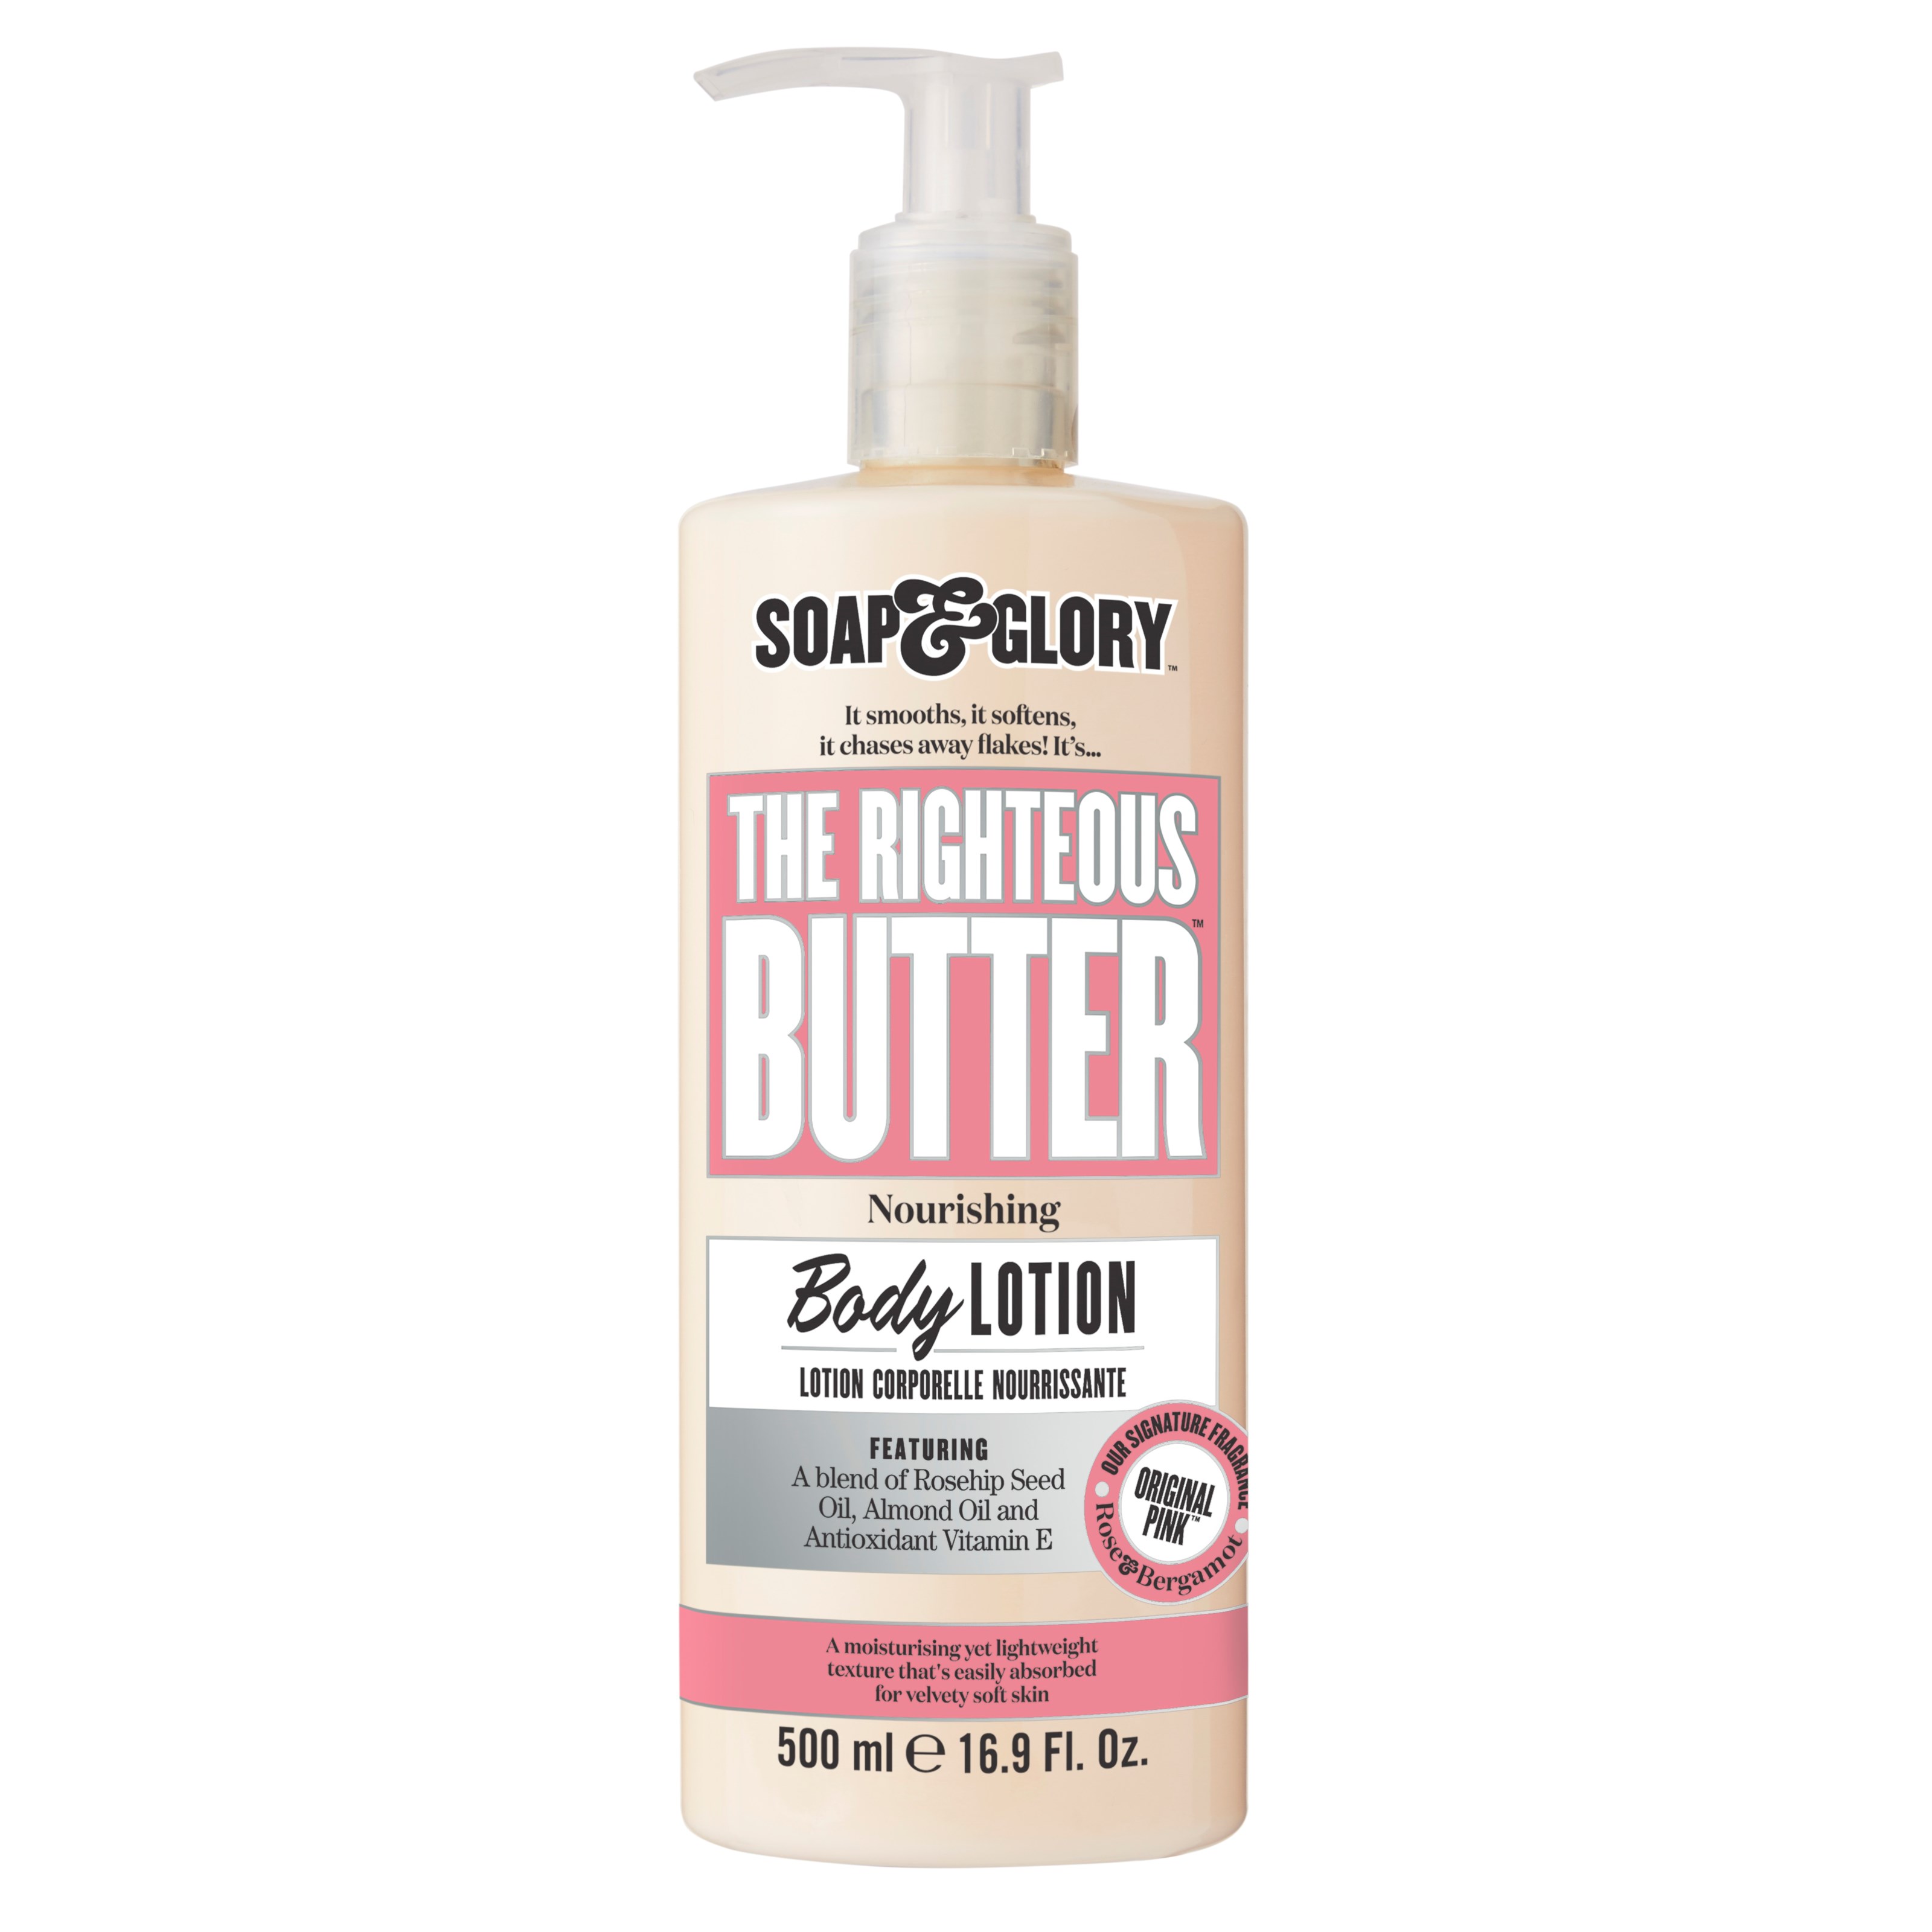 Soap & Glory Original Pink The Righteous Butter Body Lotion 500